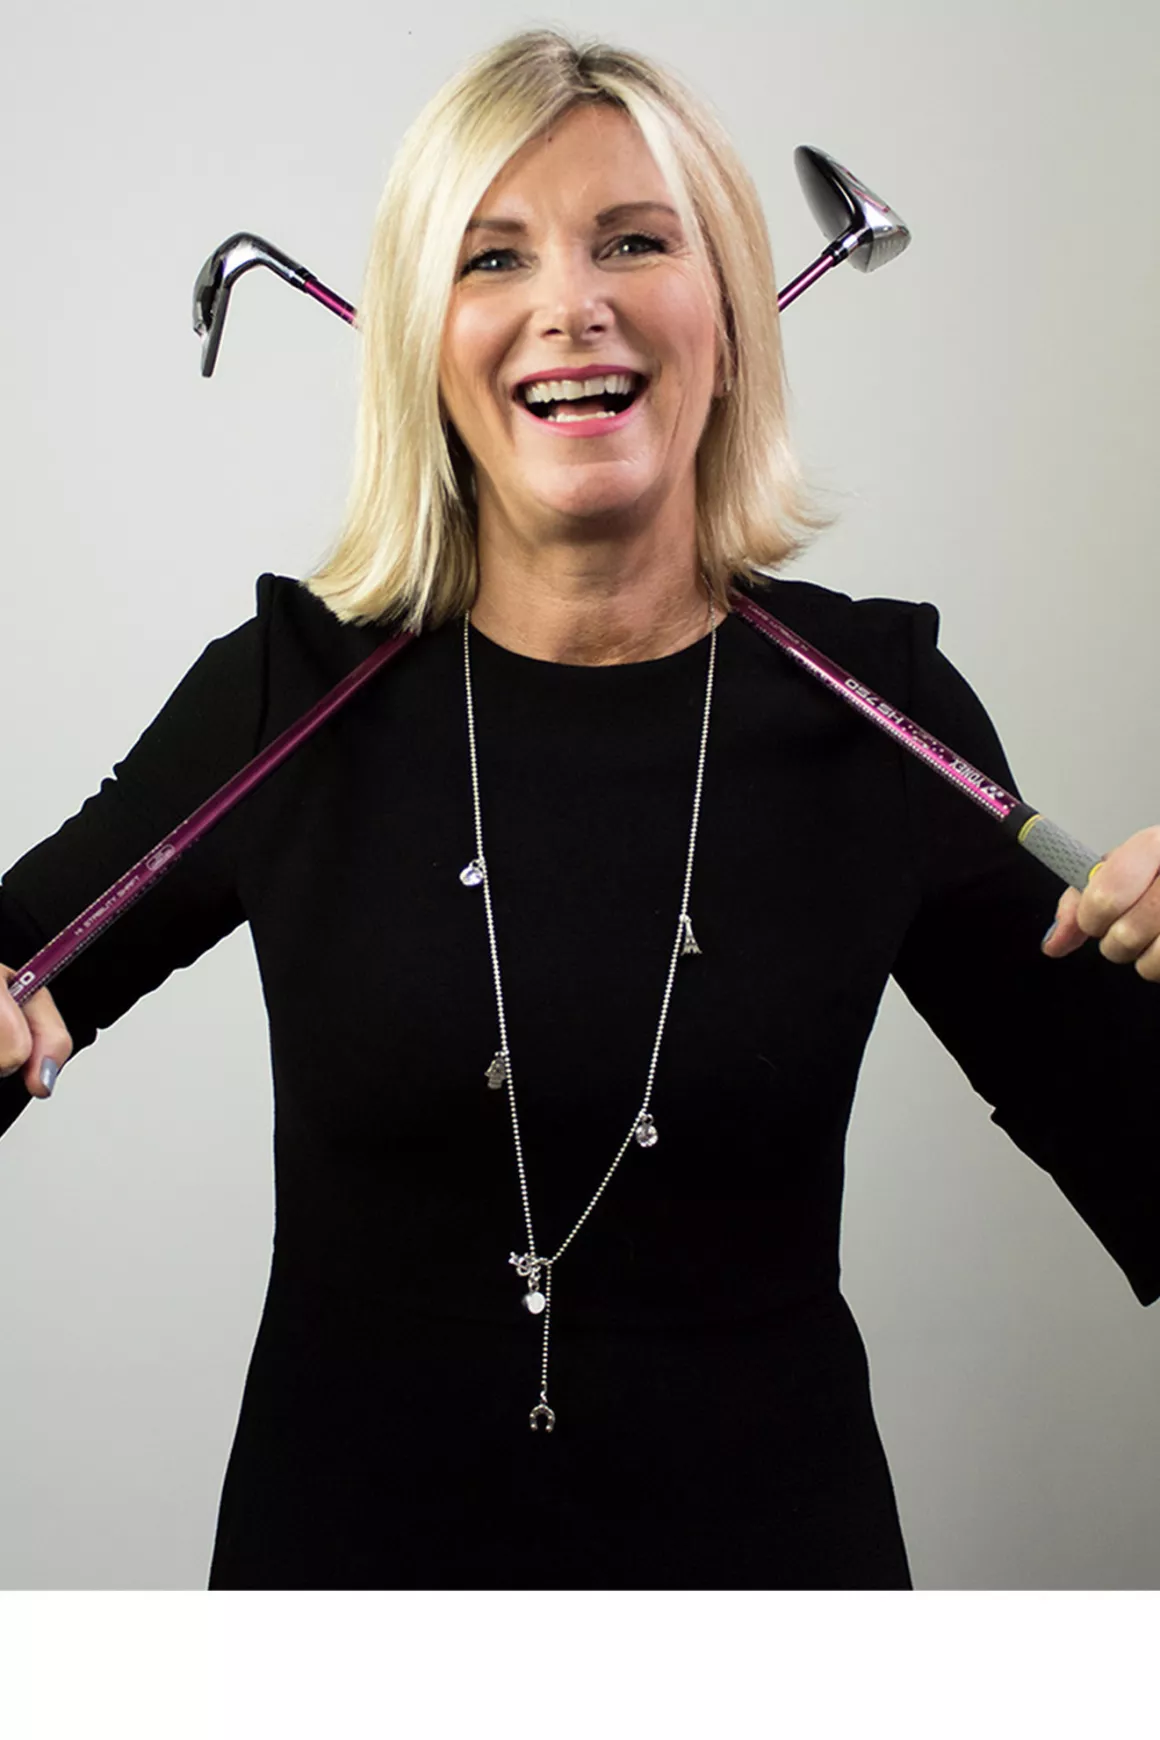 Robyn Holmes (MD) of Prime Appointments, wearing black dress holding golf clubs in both hands, photo taken with a white background